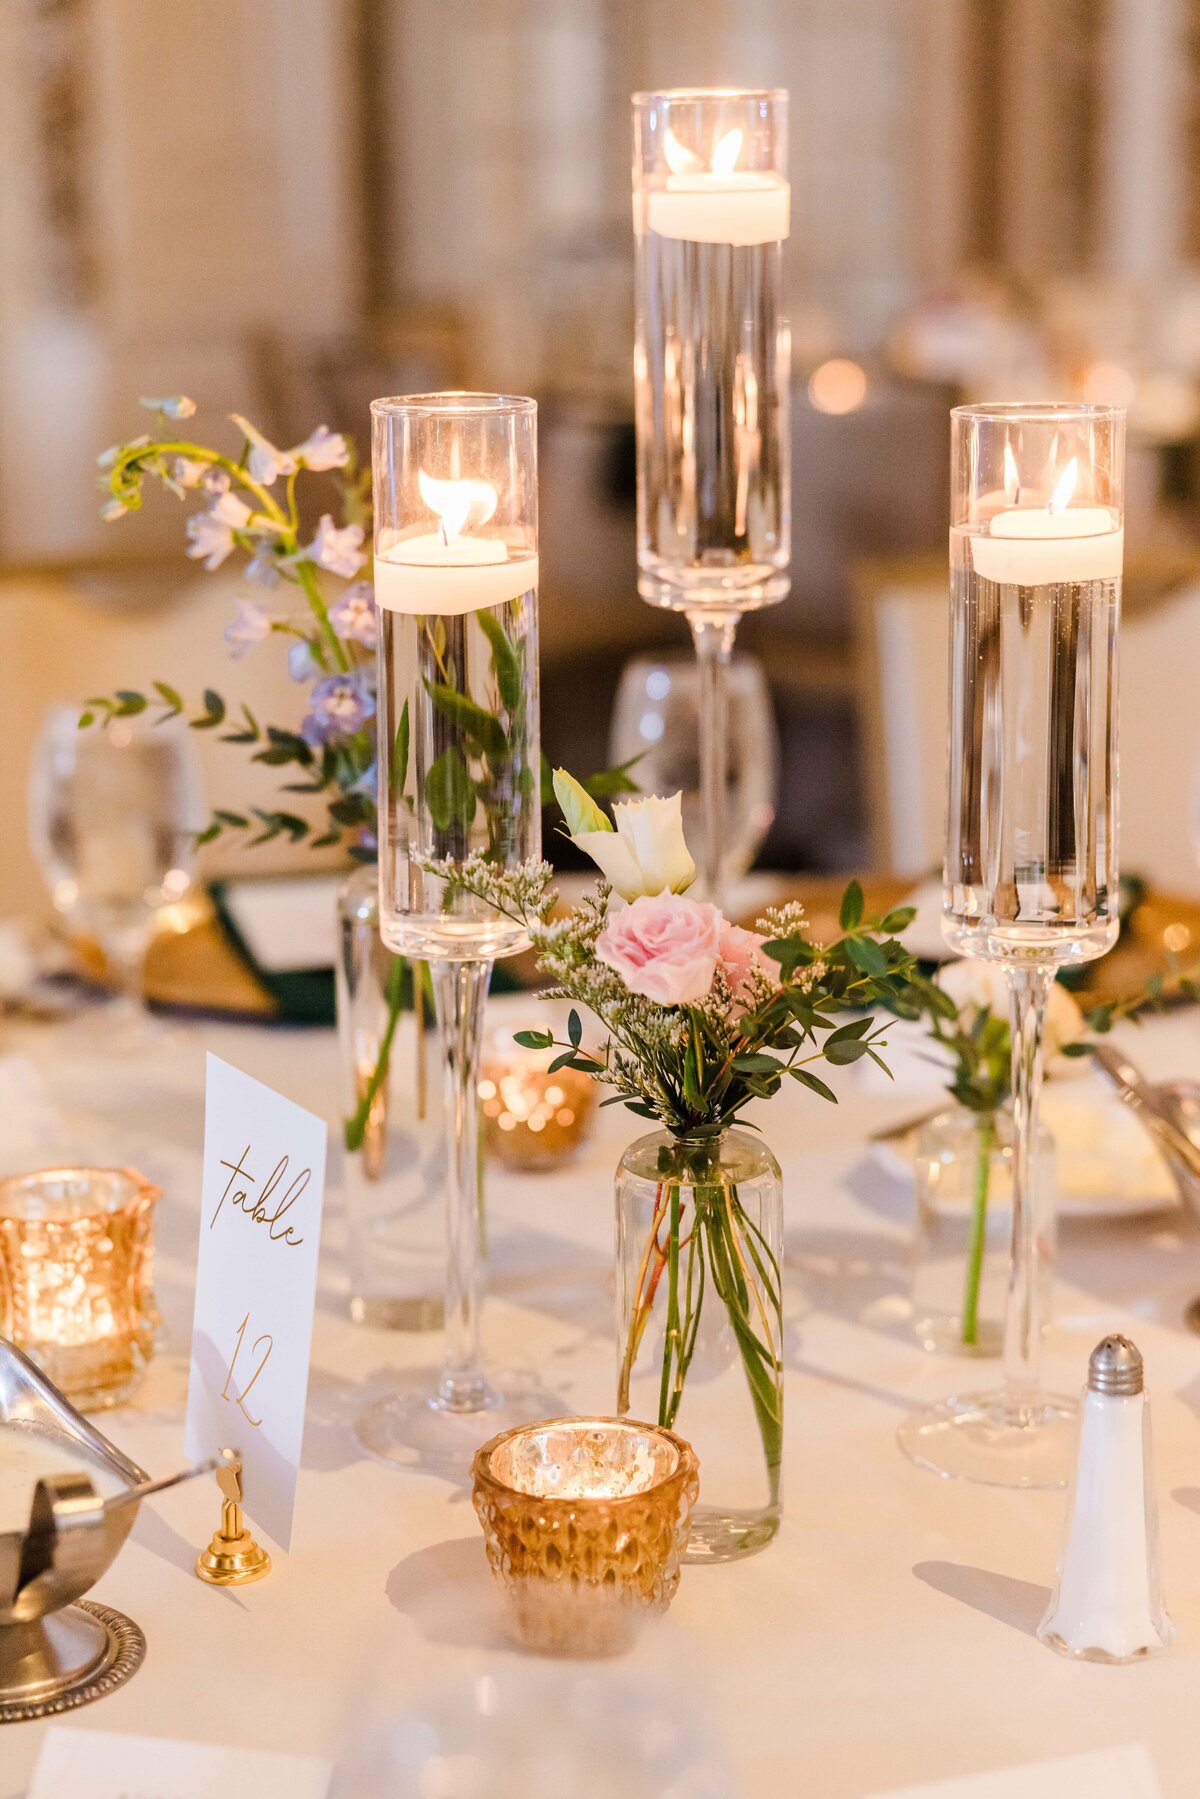 Elegant wedding table setting in Iowa featuring tall candle holders with lit candles, floral arrangements, and gold accents.